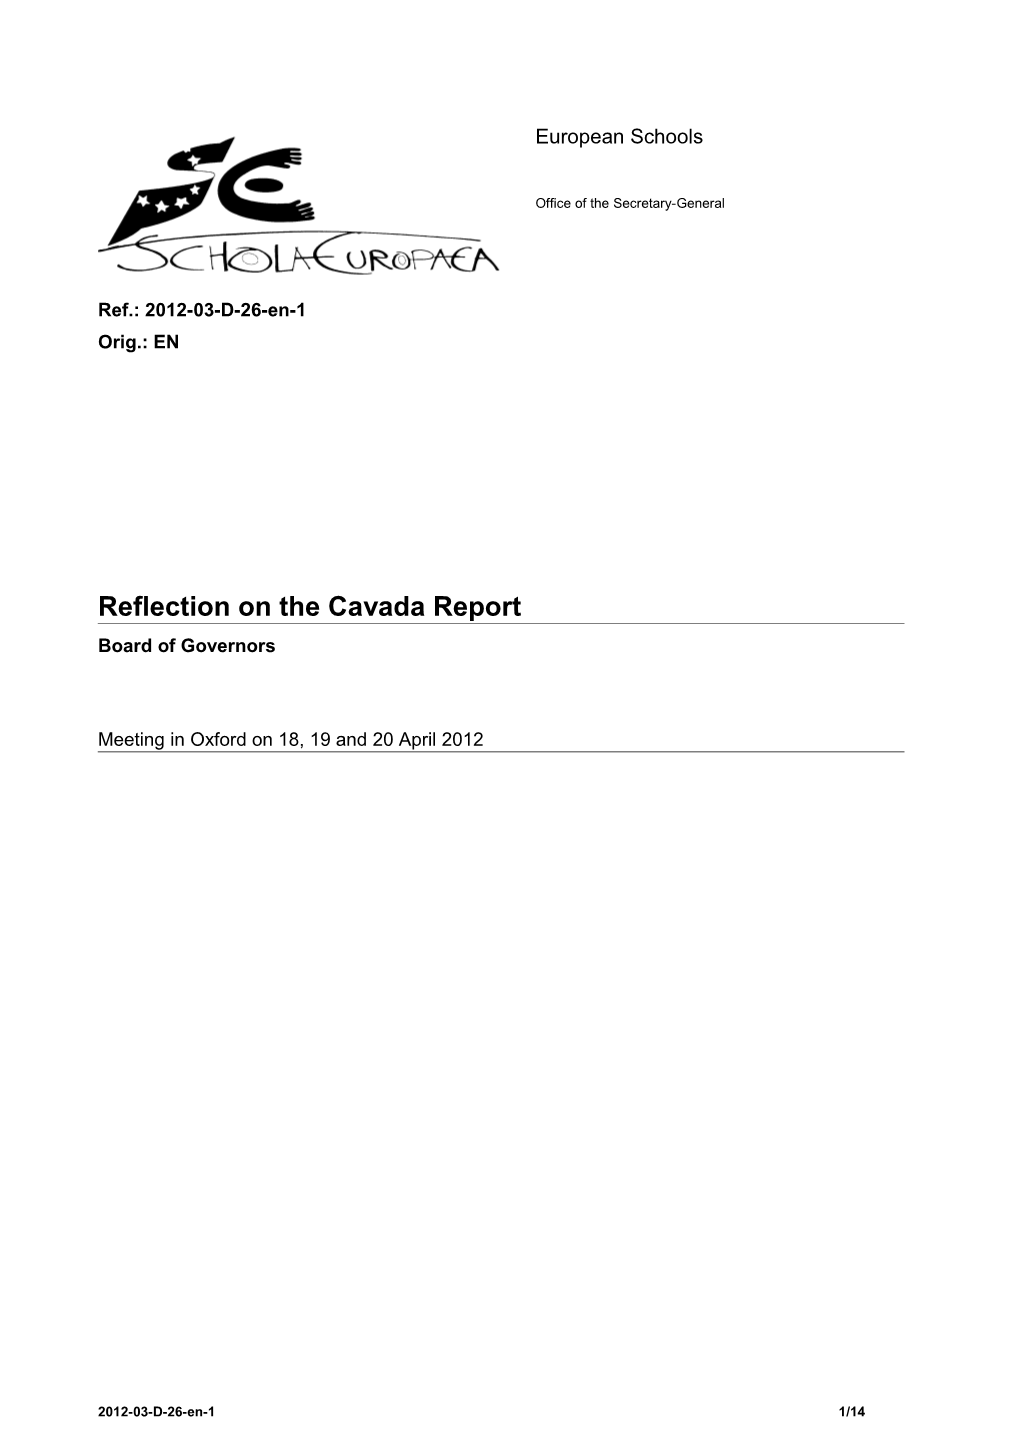 Reflection on the Cavada Report